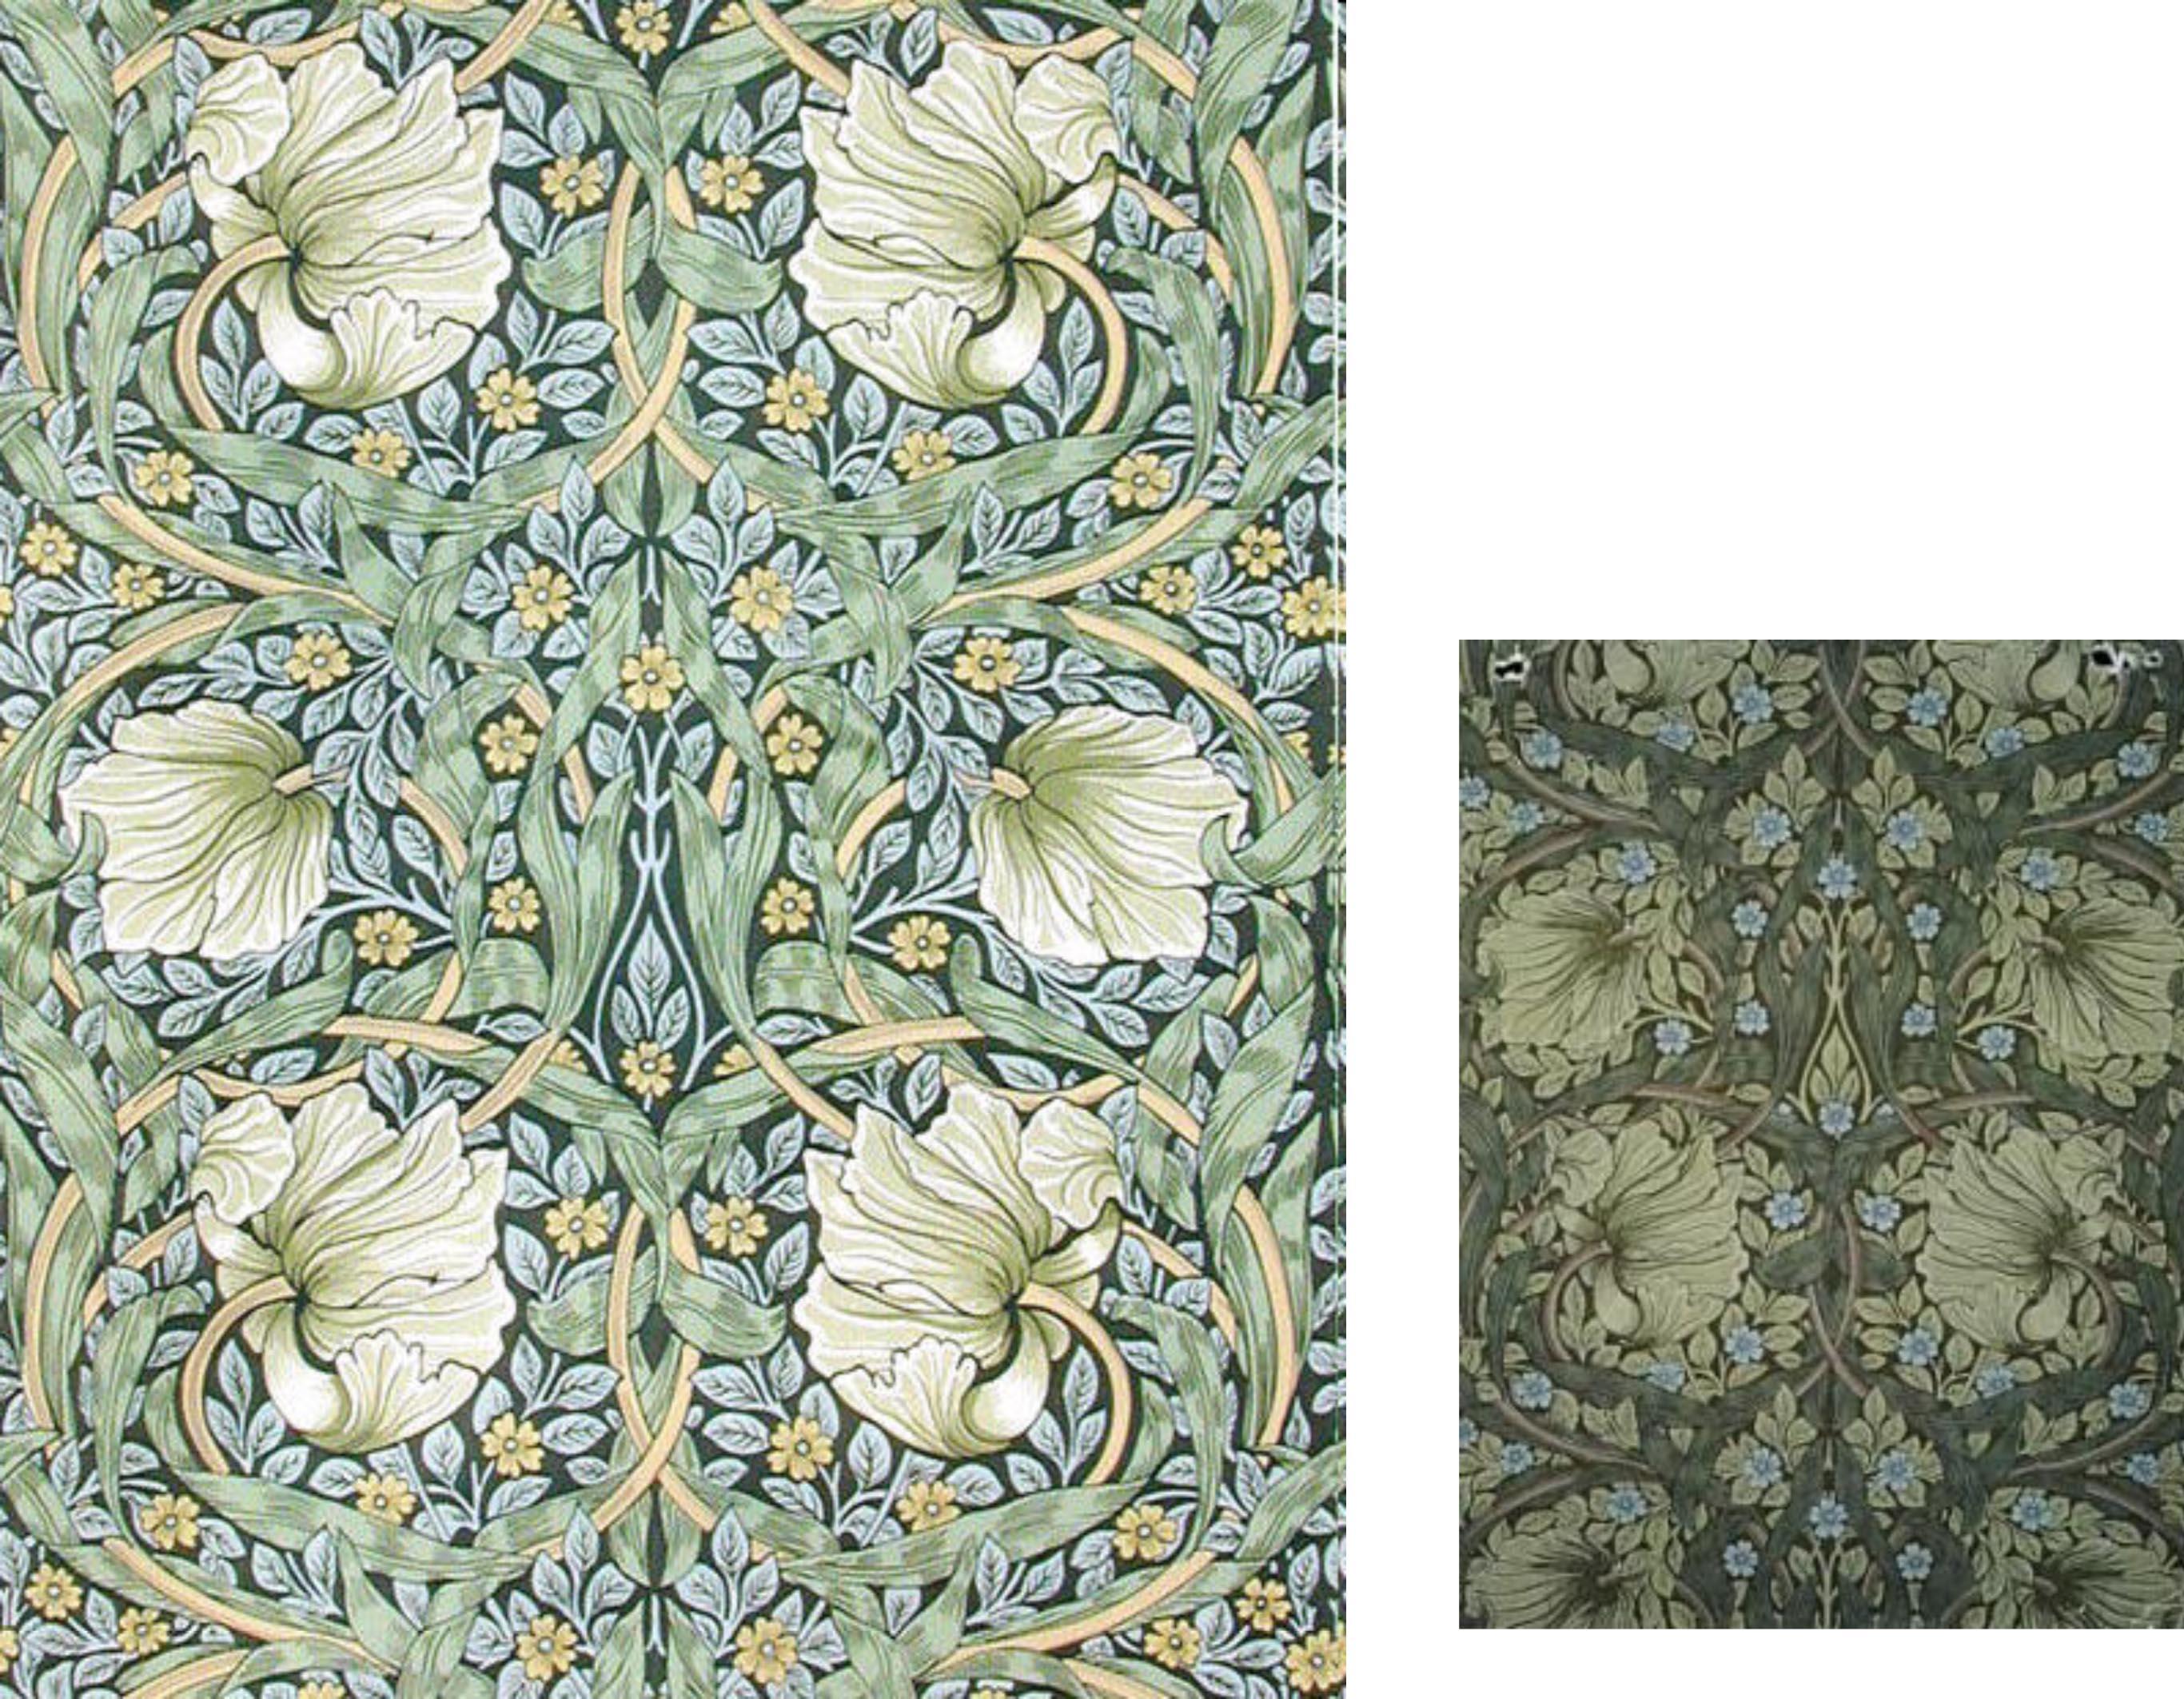 Free download Arts And Crafts Movement Wallpaper Arts and crafts